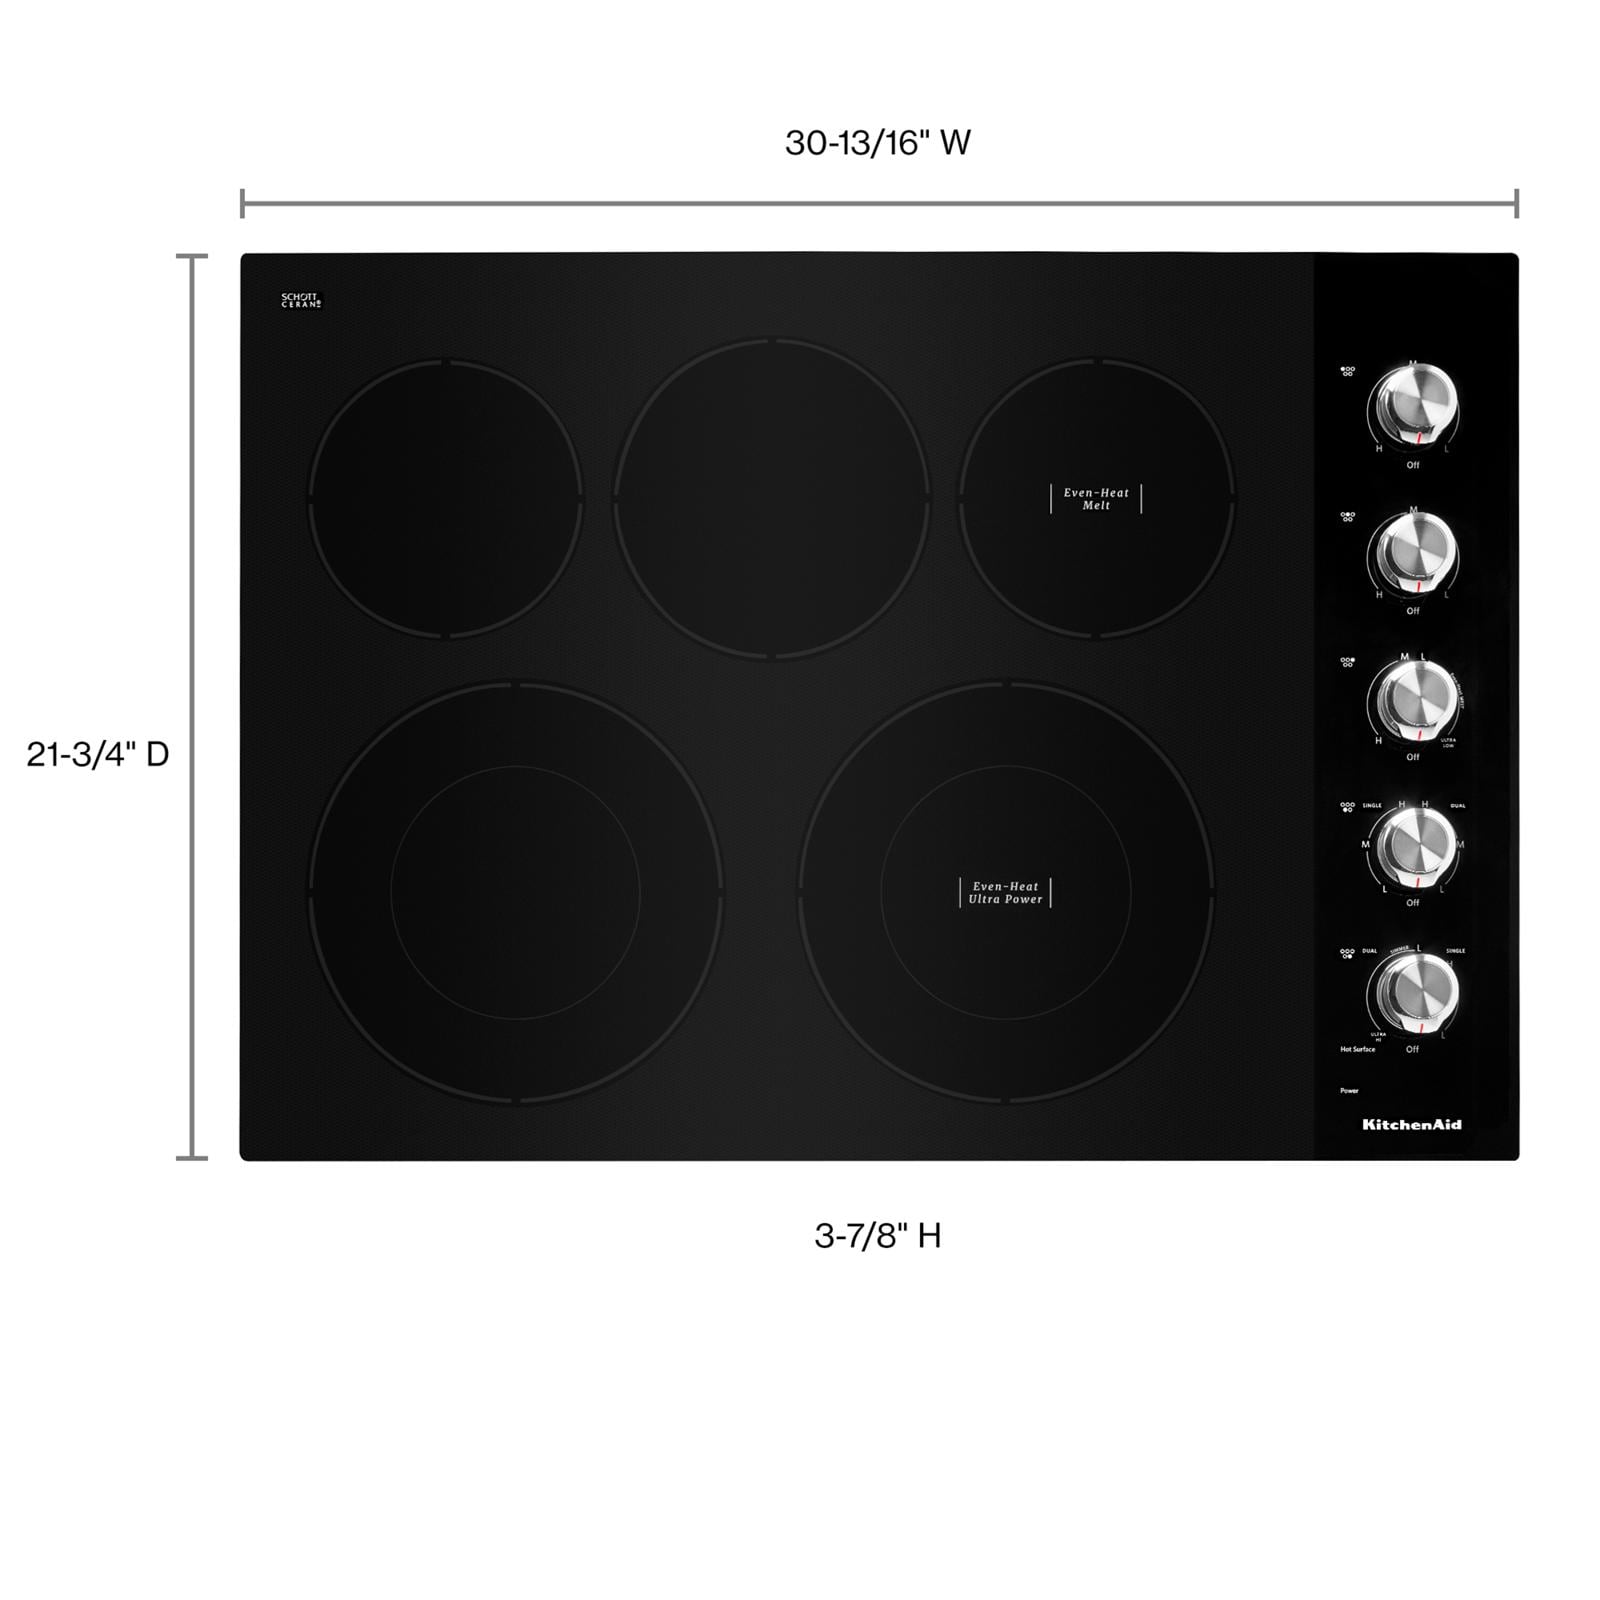  KOSTCH 30 inch Professional Electric Range with 5 Heating  Elements Cooktop, 4.55 Cu. Ft. Convection Oven Capacity, Smooth Glass Top,  in Stainless Steel, KOS-30RE06H (Black) : Appliances